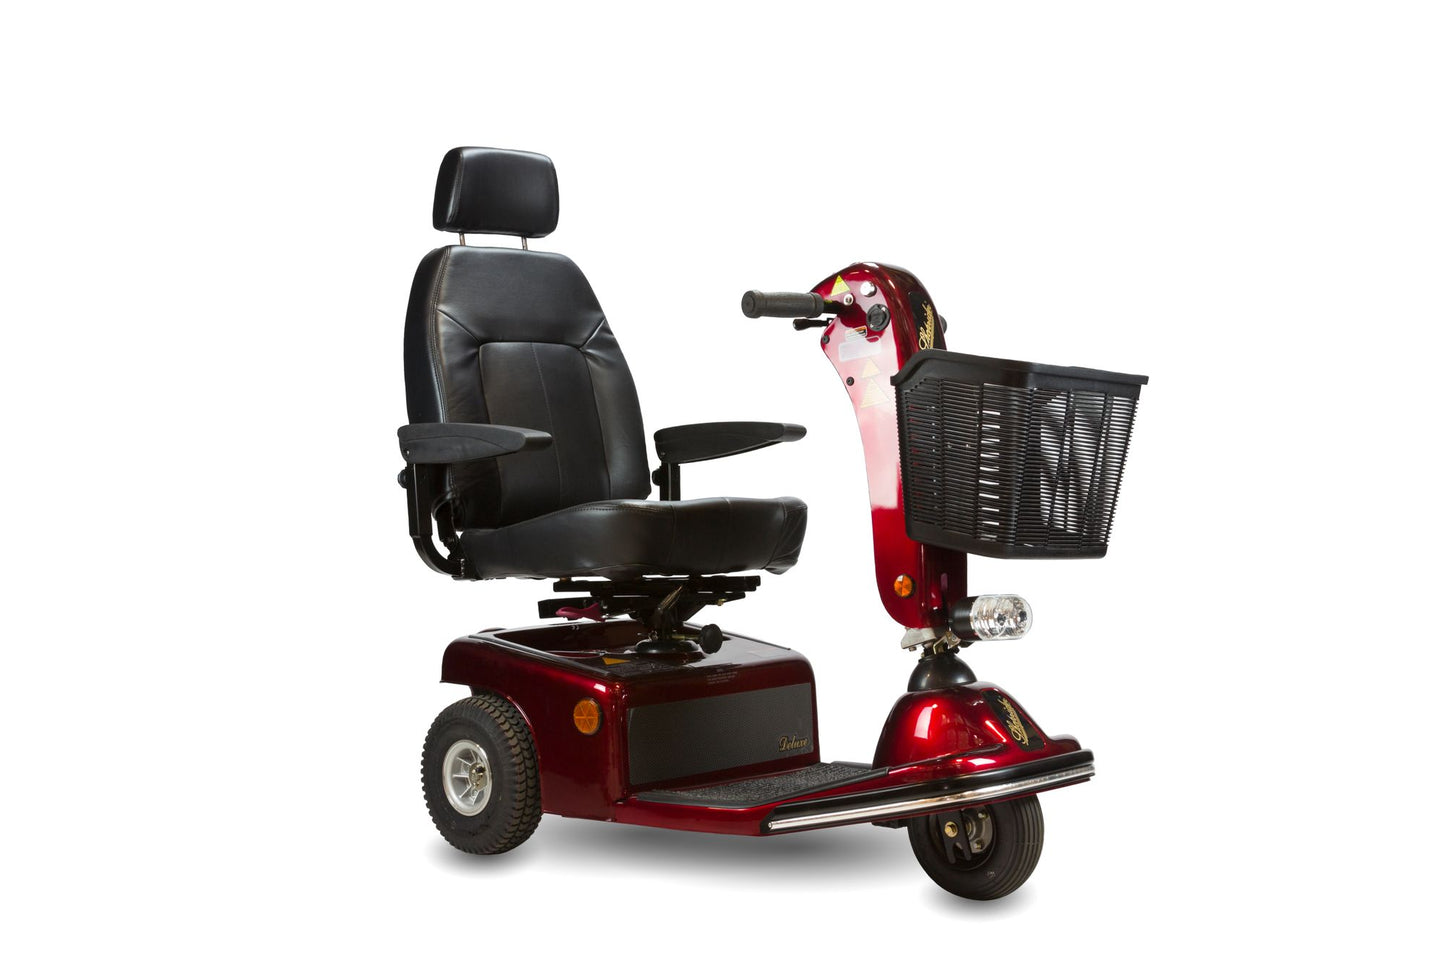 Shoprider Sunrunner 3-Wheel Mobility Scooter - Extra Long Distance, Swivel Seat,  Weight Capacity 300lbs